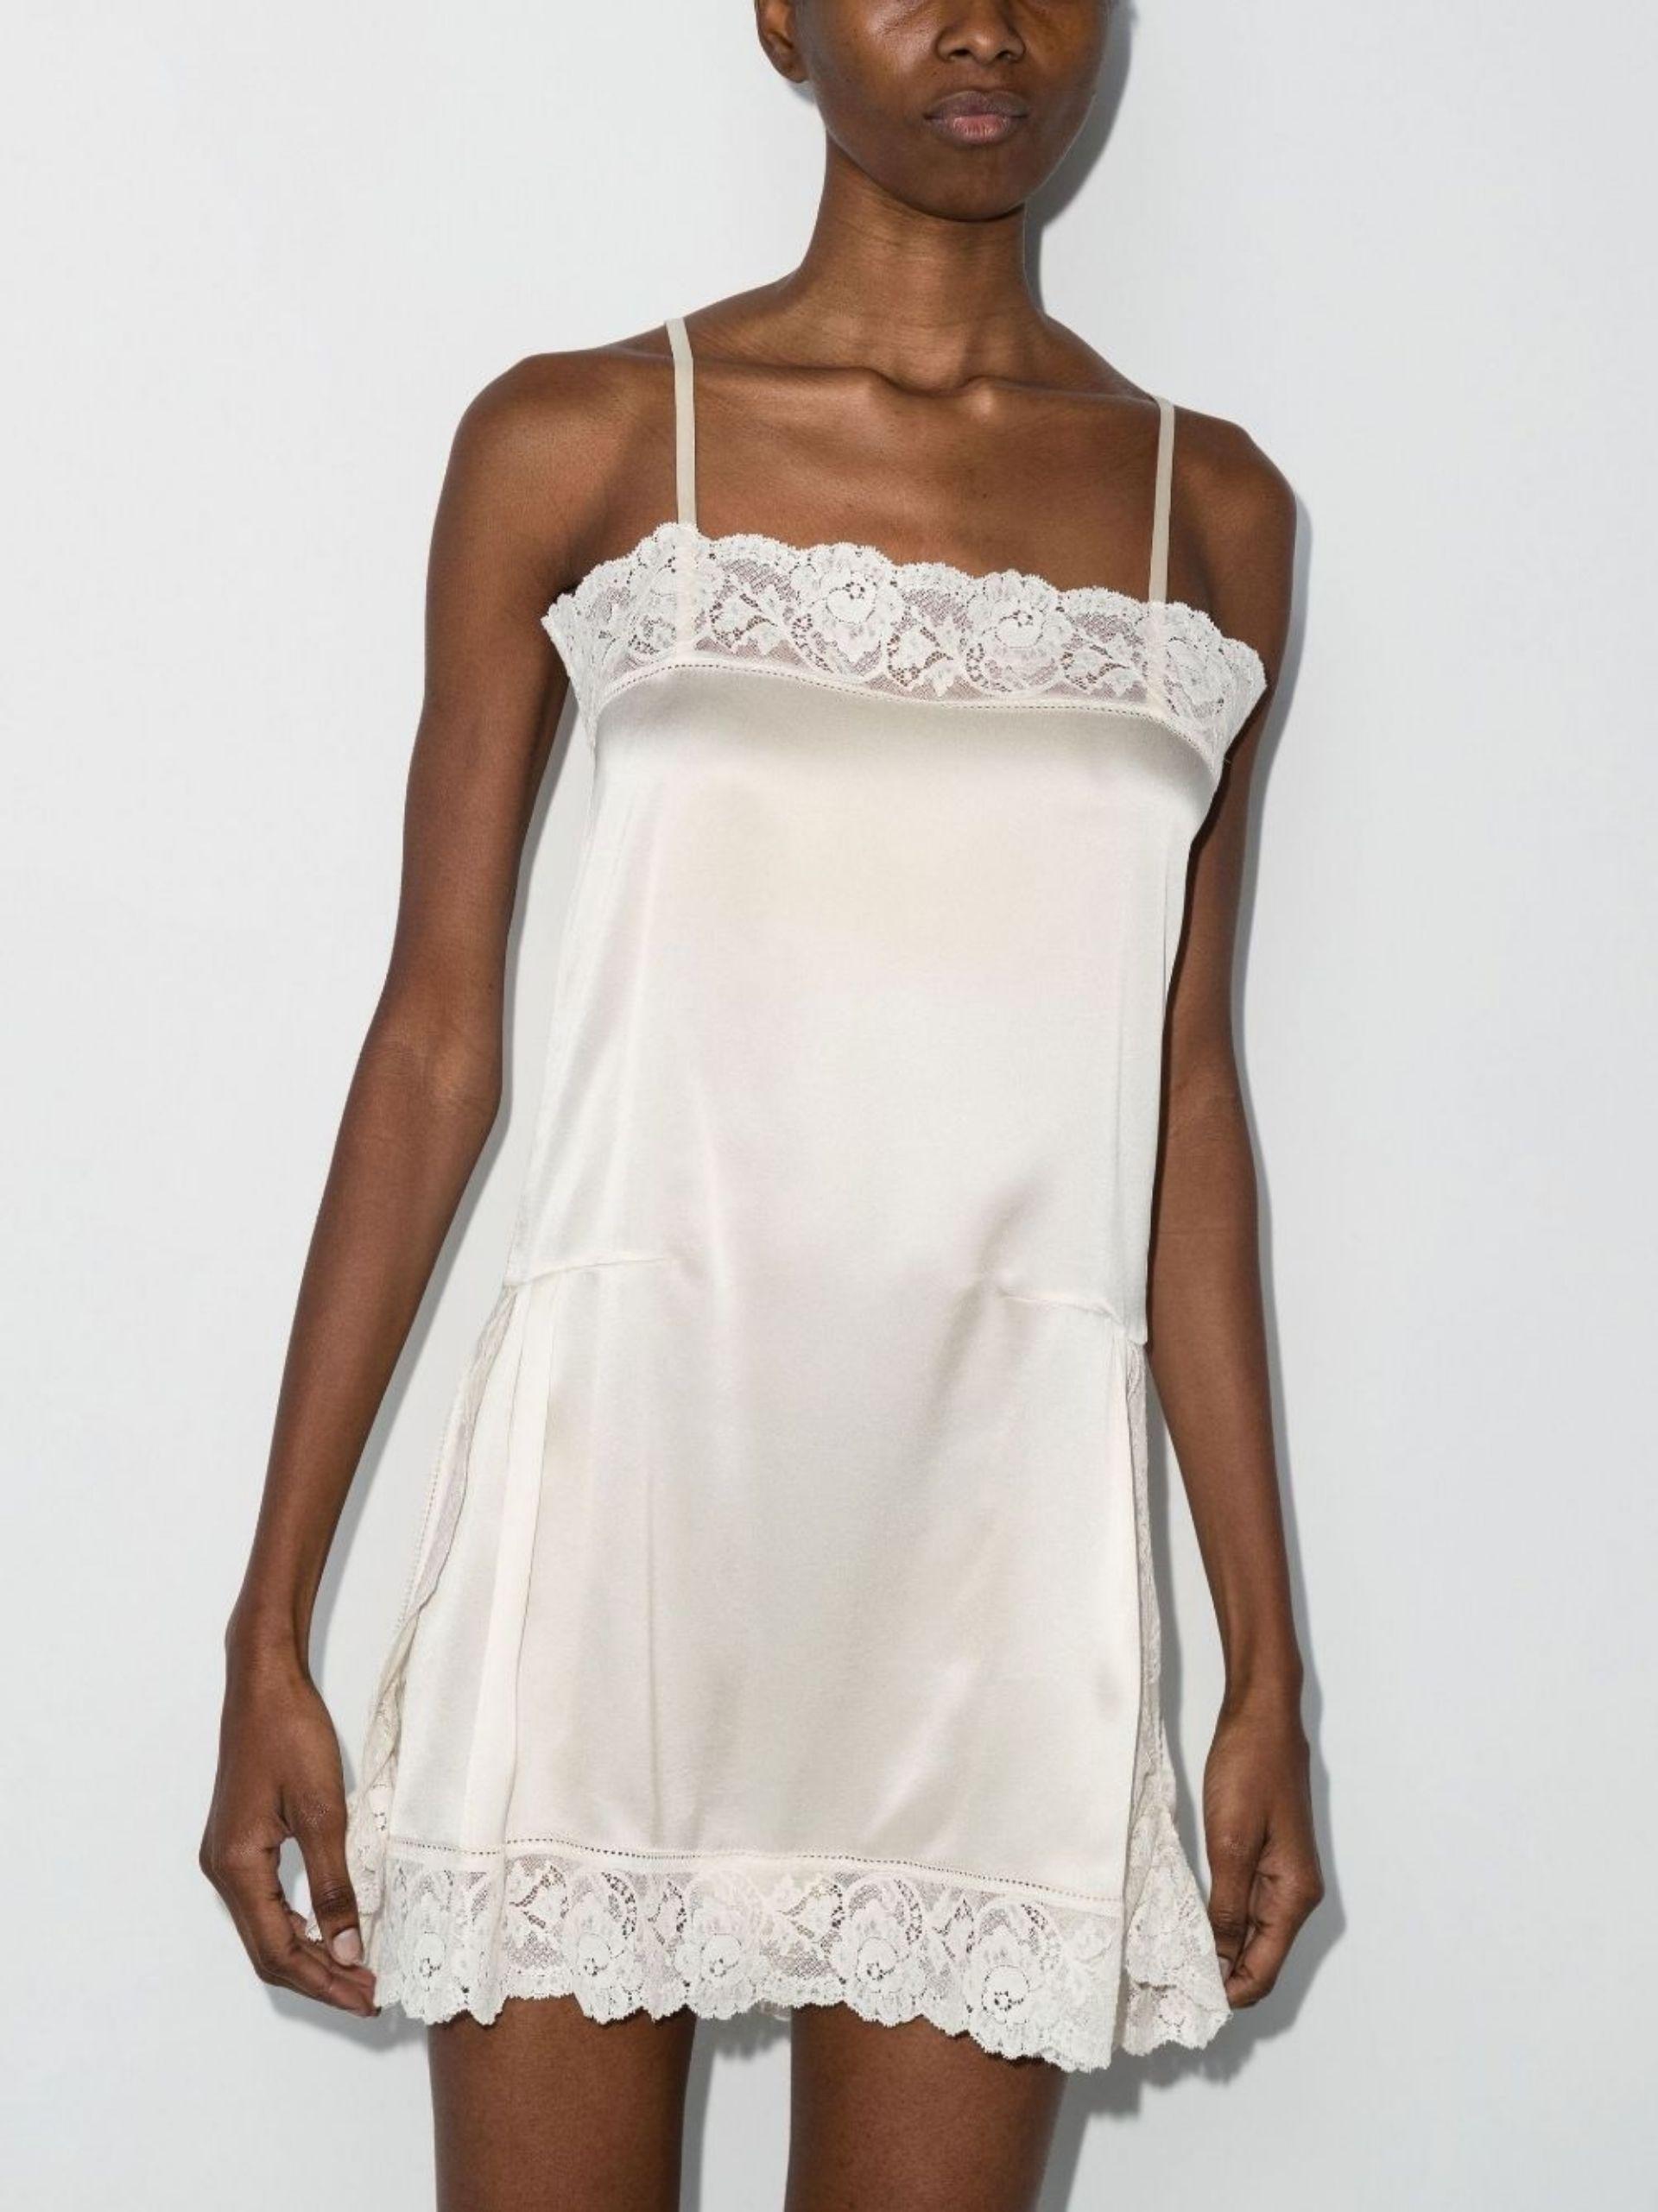 Match Bourgogne Foresee Maison Margiela Lace Trim Silk Mini Dress in White | Lyst